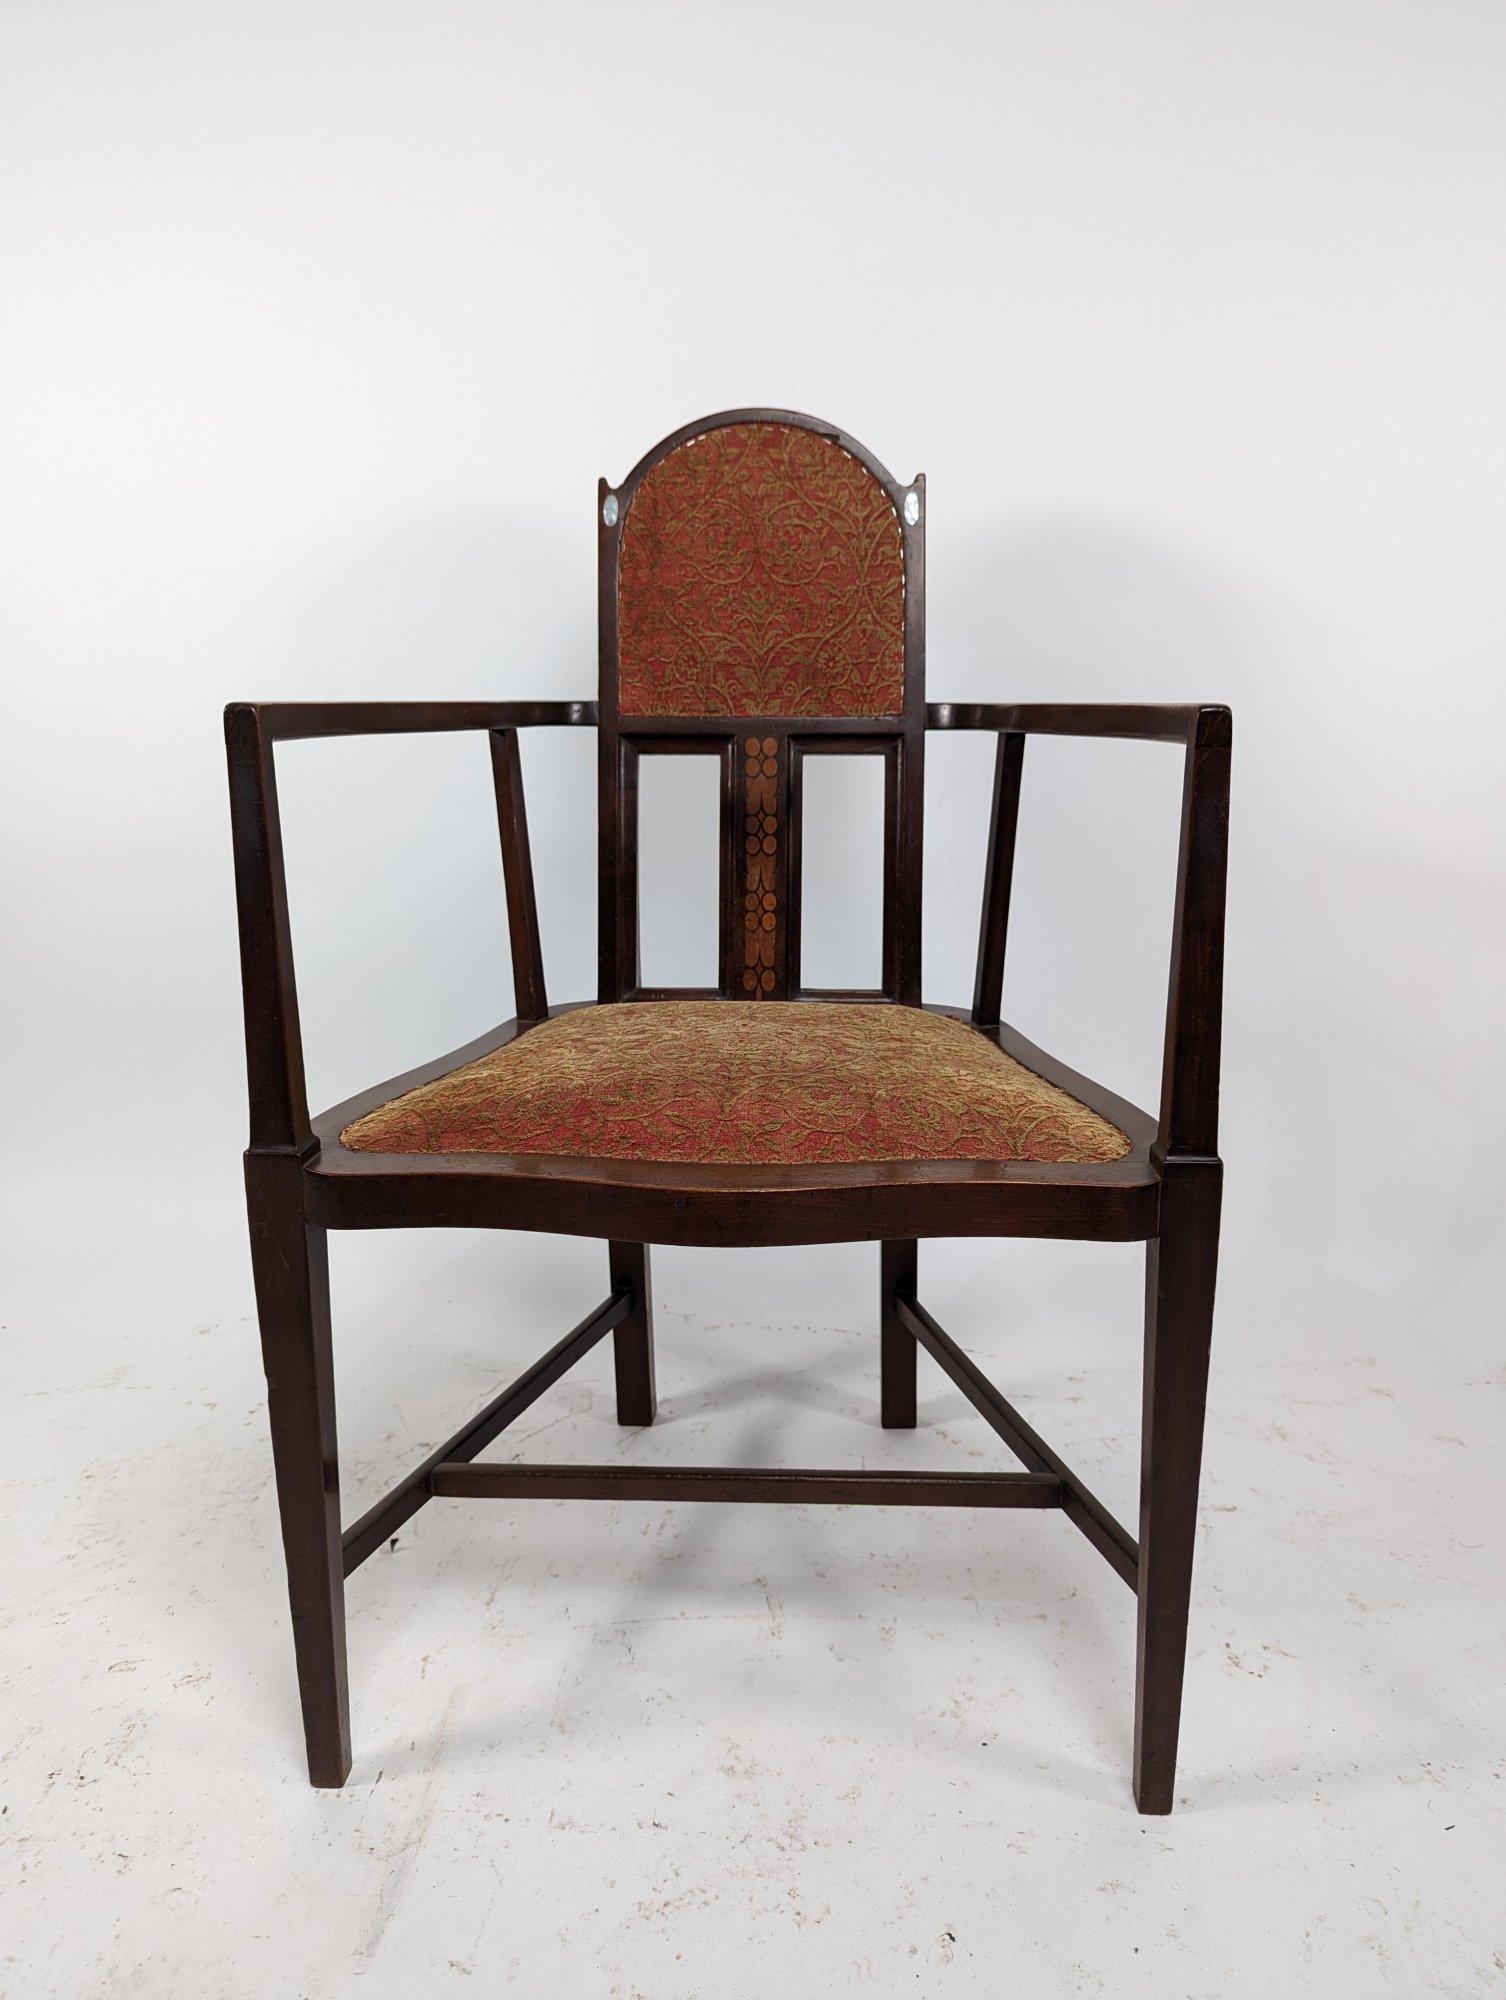 An armchair designed by George Montague Ellwood and made by J S Henry, with arched top and oval mother-of-pearl inlays just below the ears and sinuous arms with conforming seat details to the side and subtle curve to the front and extra